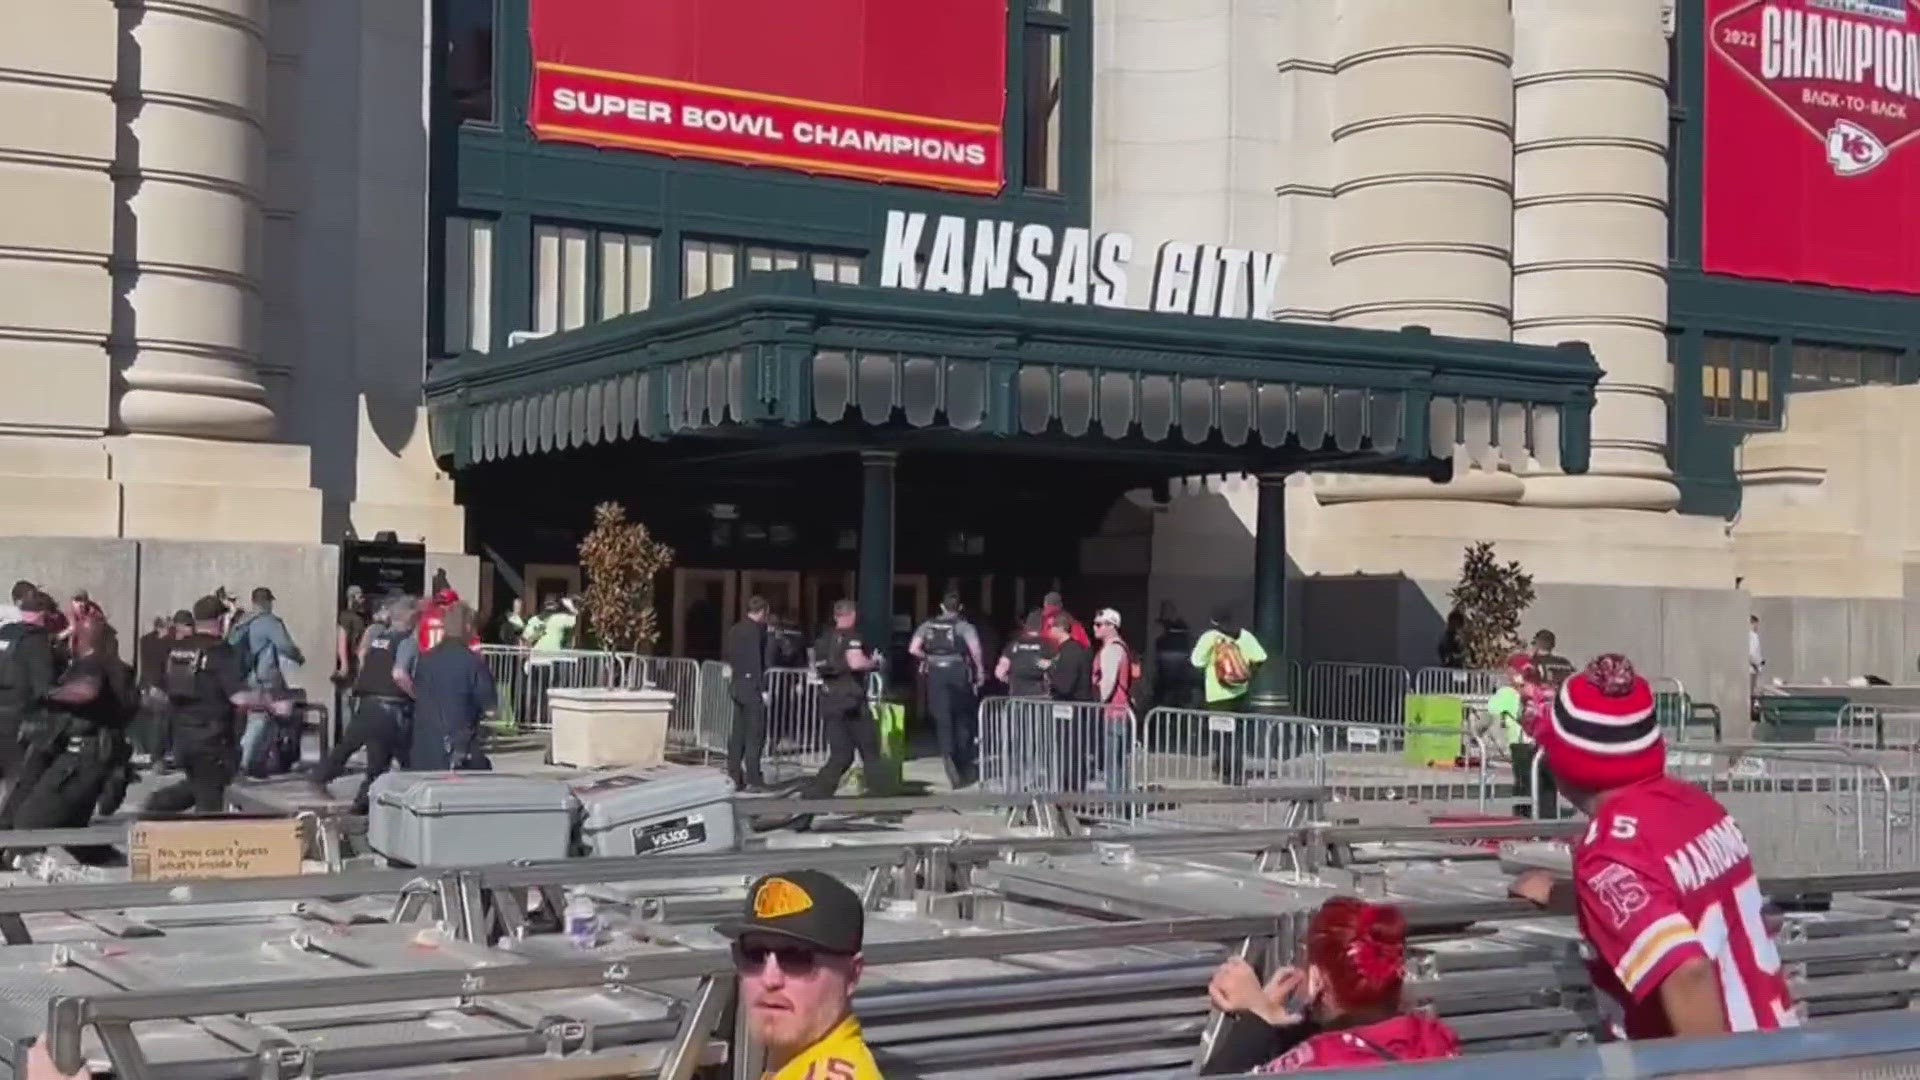 Kansas City police say today a dispute likely sparked a deadly mass shooting at a Super Bowl victory celebration.